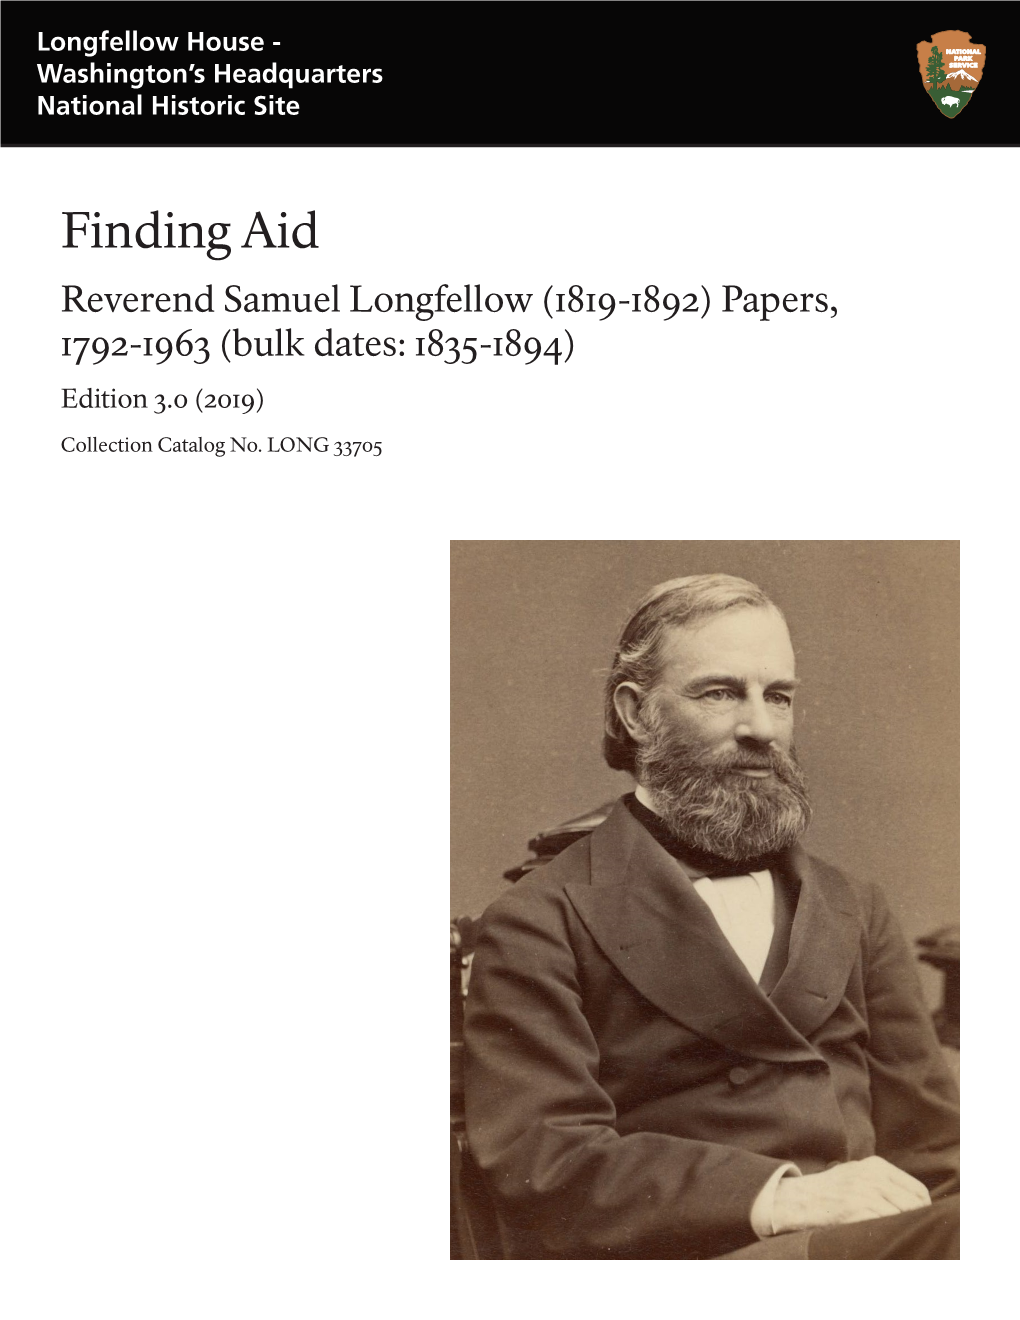 Finding Aid to the Reverend Samuel Longfellow